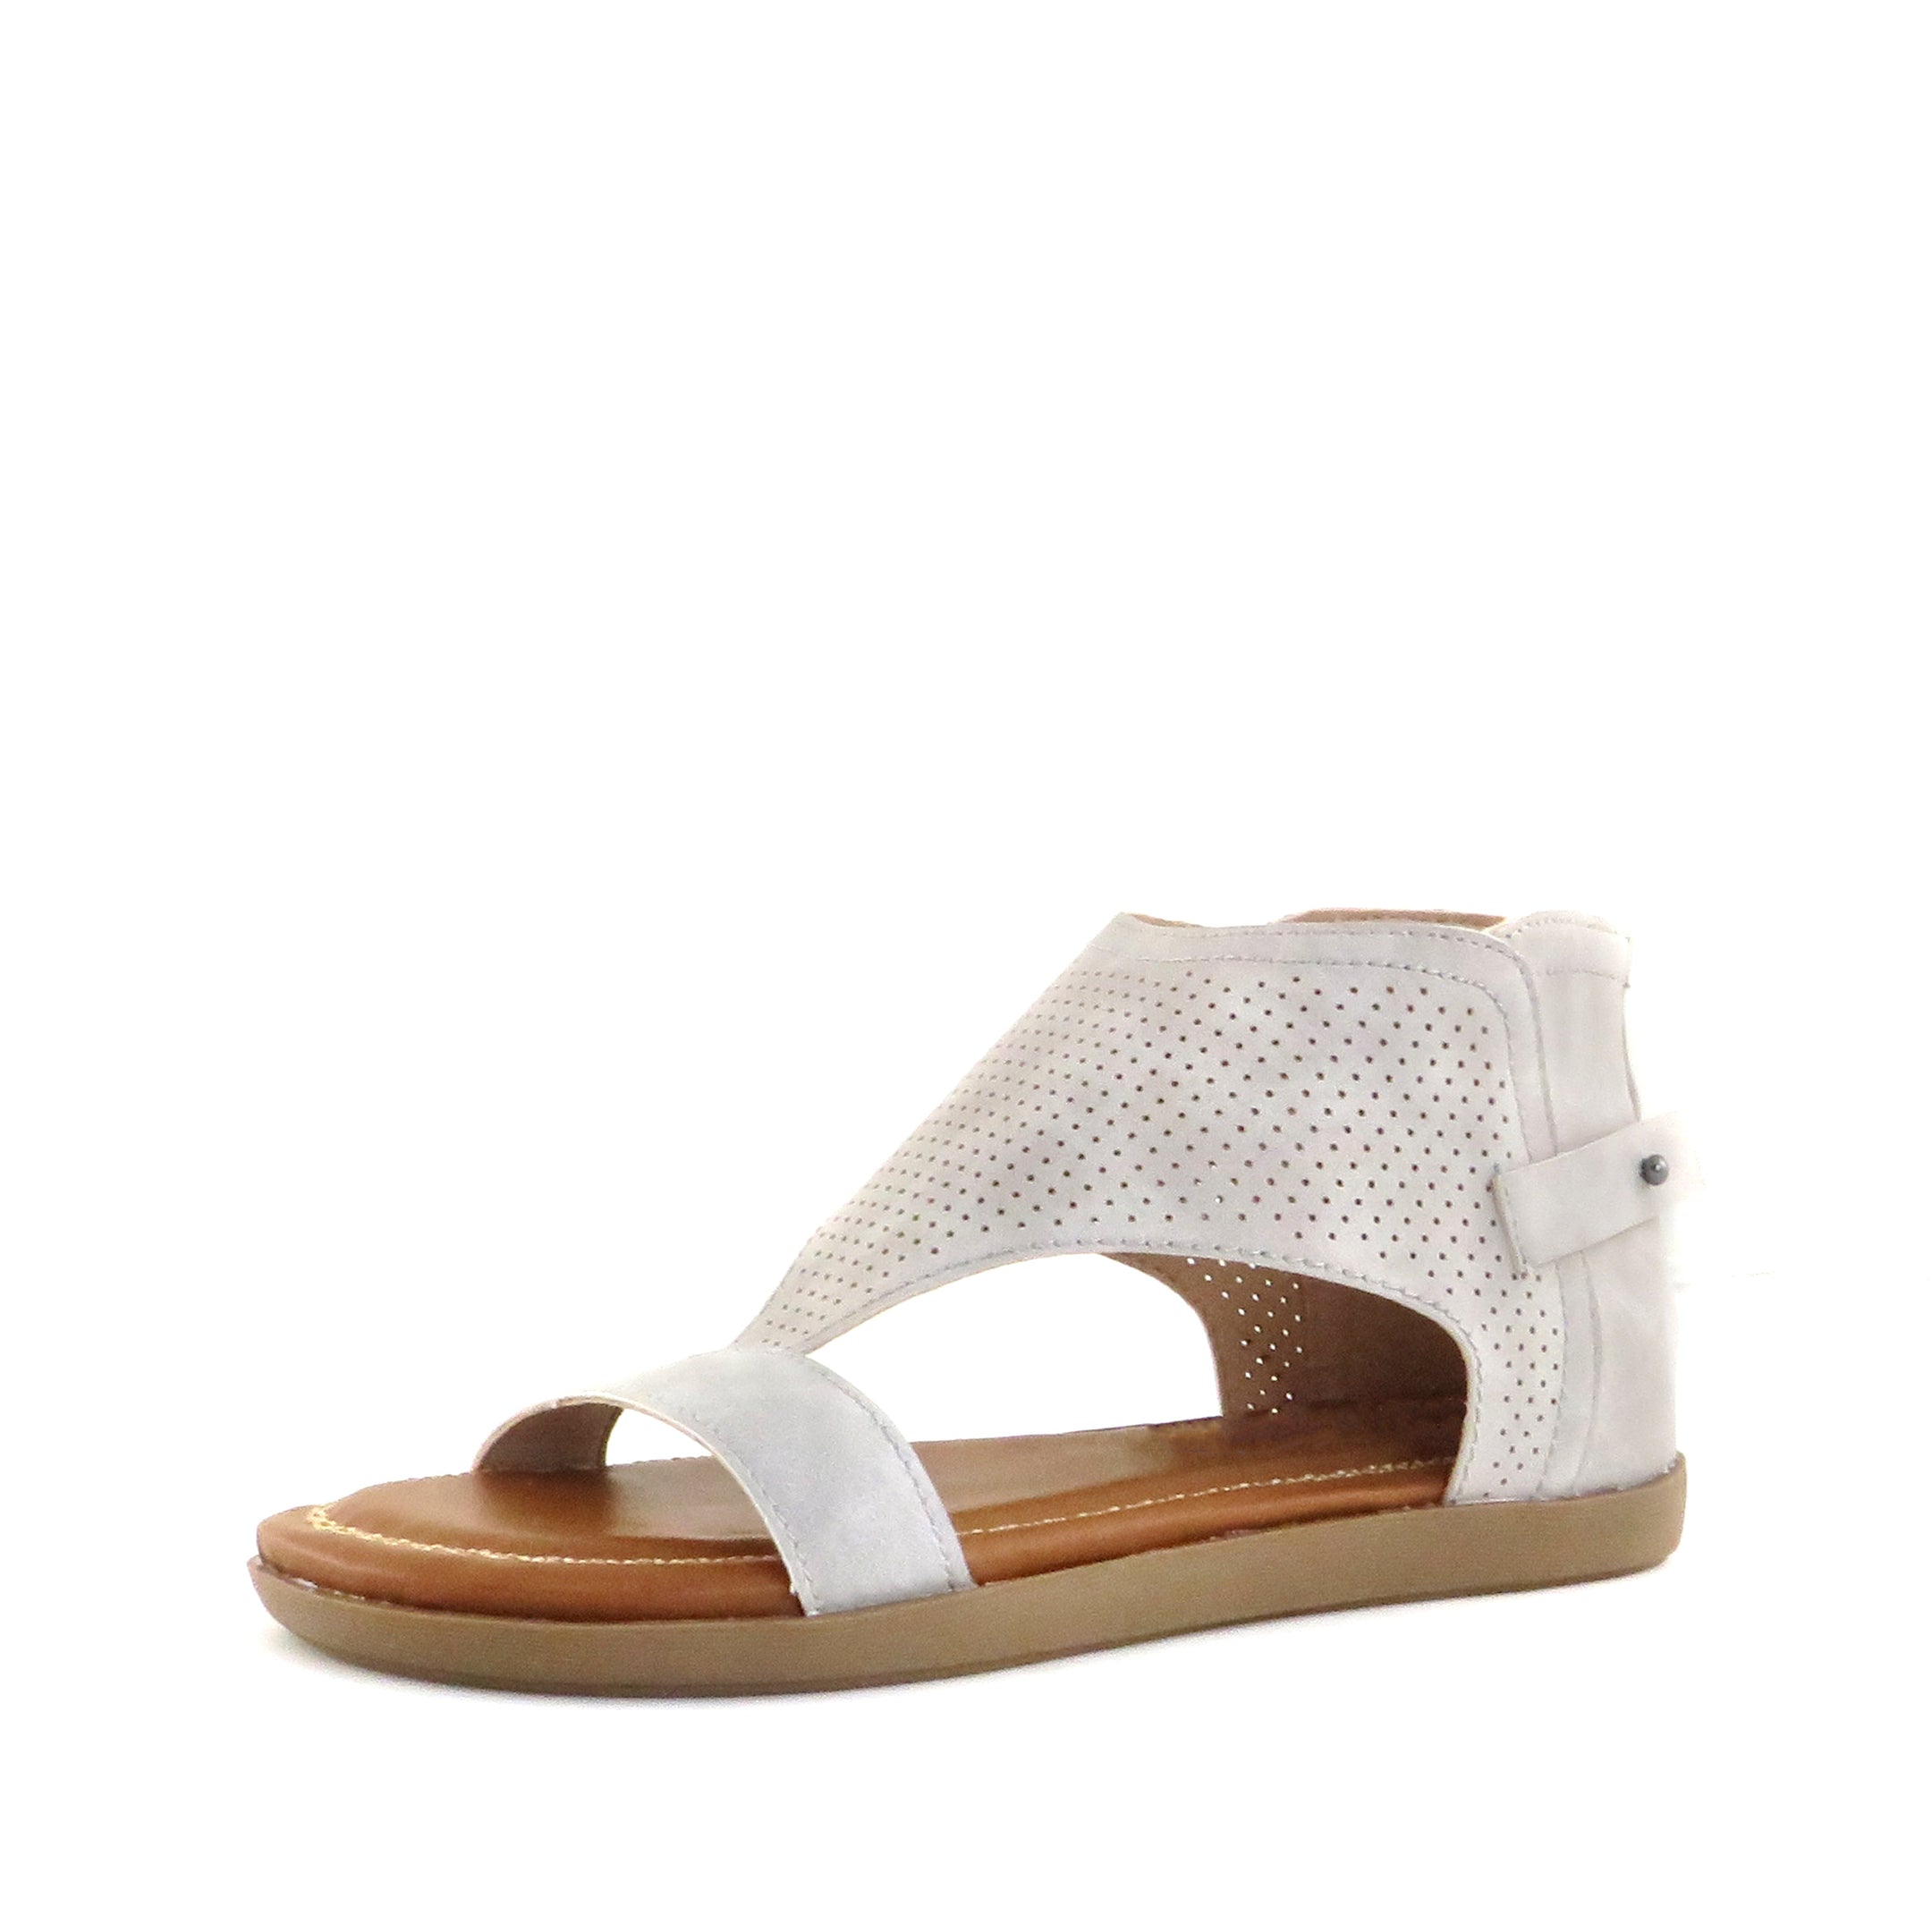 Buy Women's Coop Stone Perforated Sandal by Nest Shoes